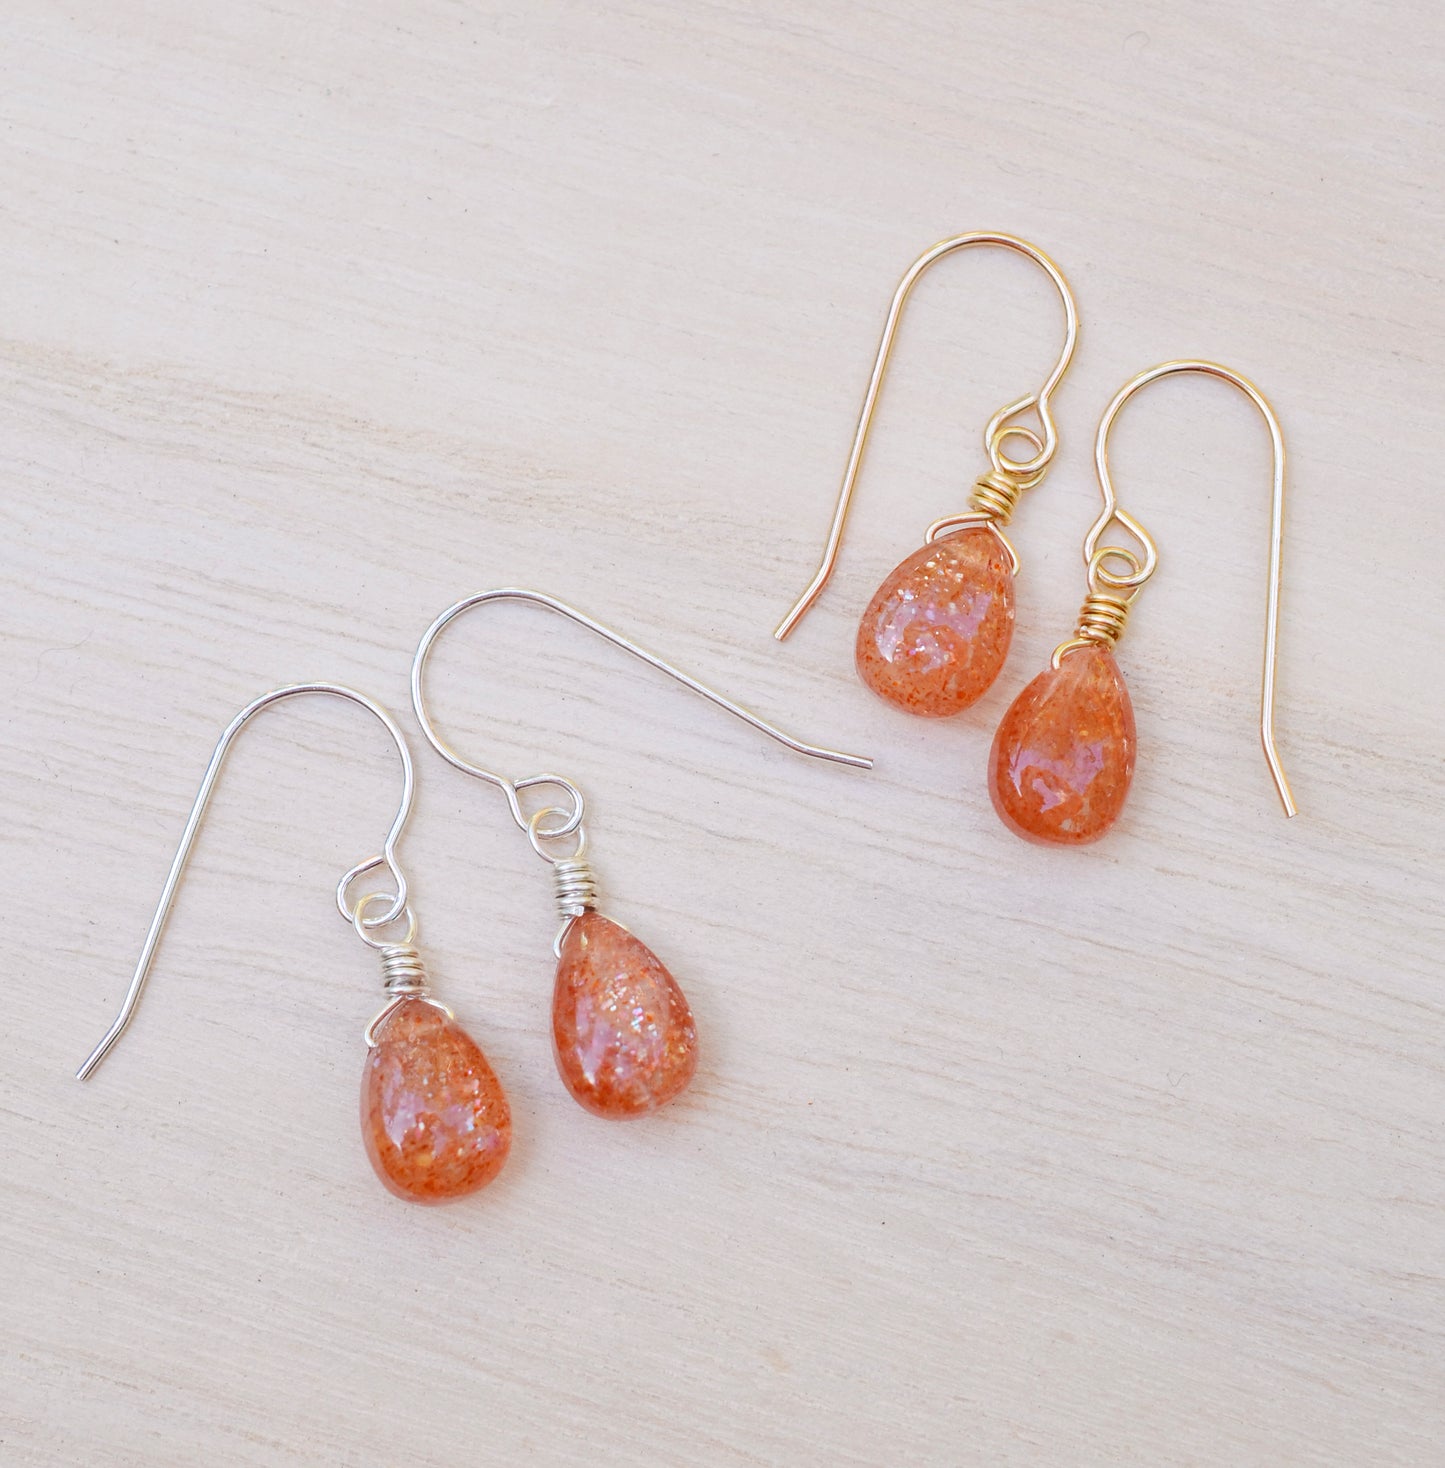 Genuine orange sunstone teardrop dangle earrings shown in 14k gold filled and sterling silver. The gemstones are smooth polished. 